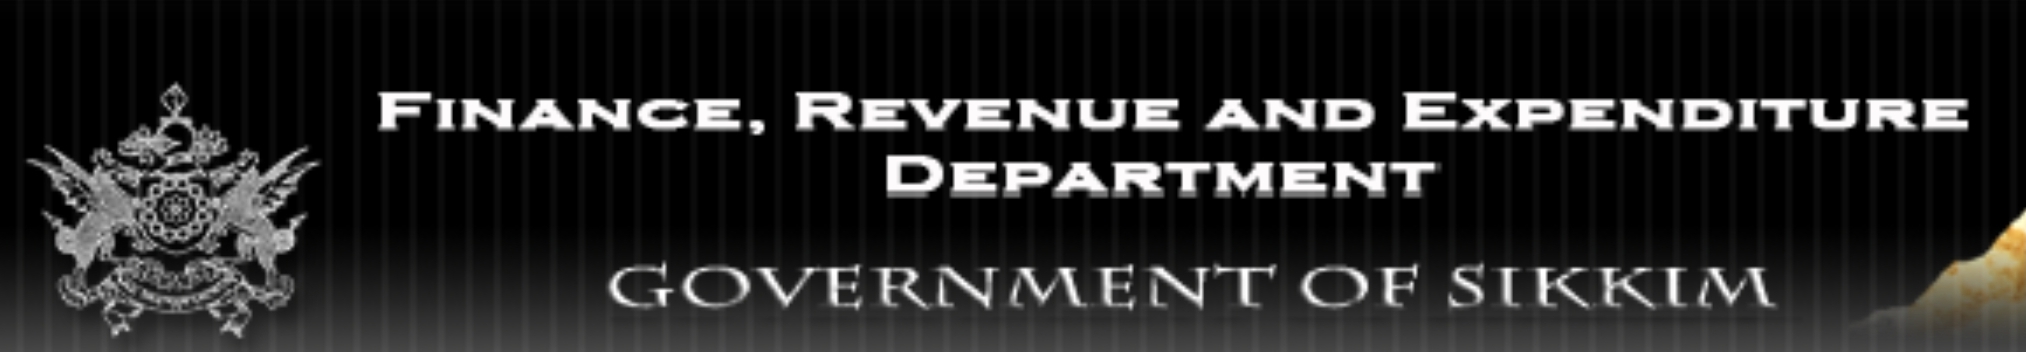 The Finance, Revenue and Expenditure Department of Sikkim